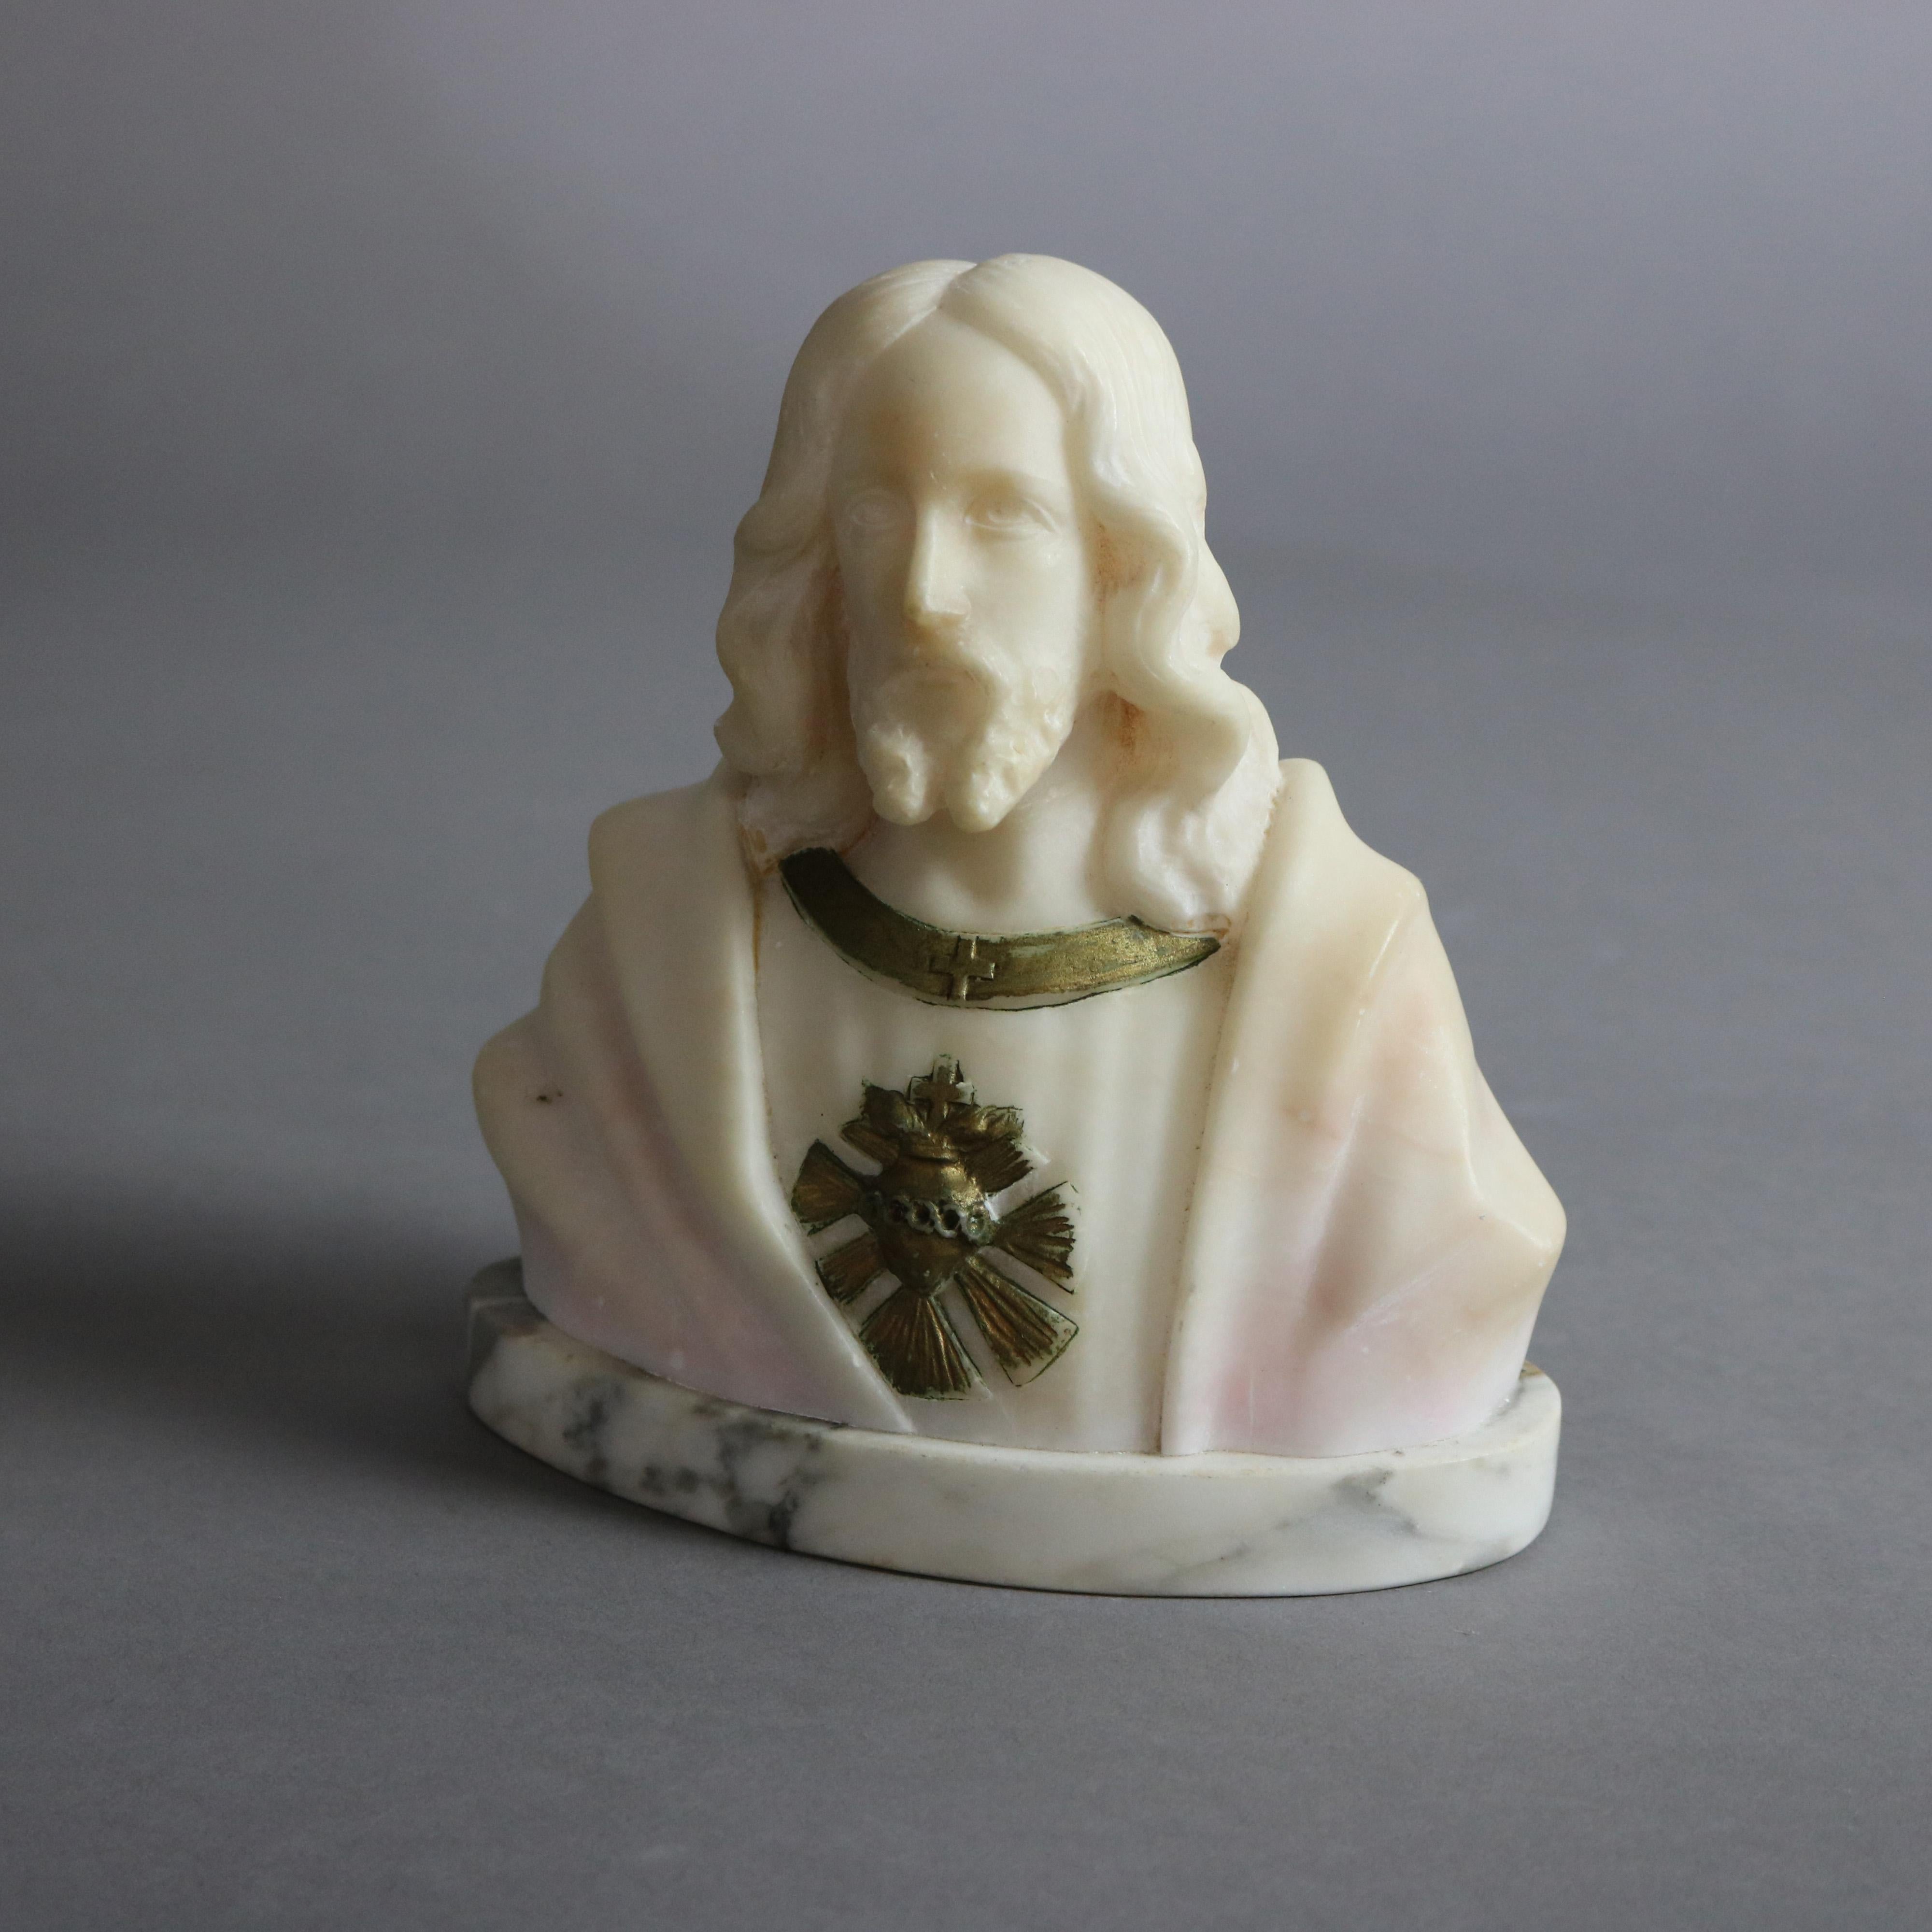 An antique Italian sculpture offers carved and parcel gilt alabaster bust of Jesus Christ, seated on marble base, c1890

Measures - 6.5'' H x 6'' W x 3'' D.